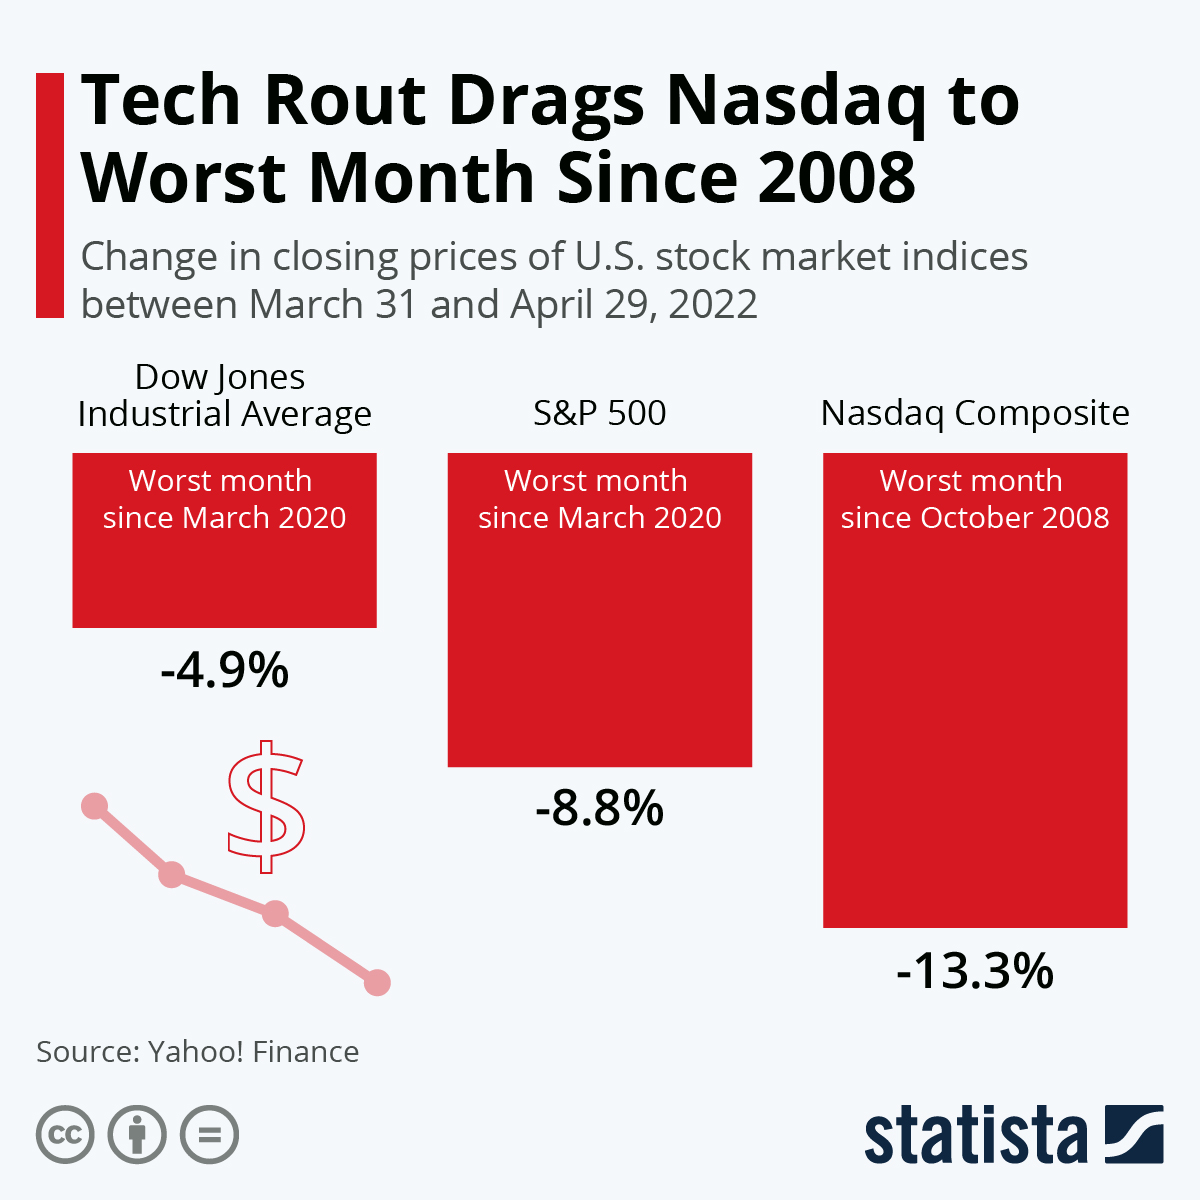 Tech Rout Drags Nasdaq to Worst Months Since 2008